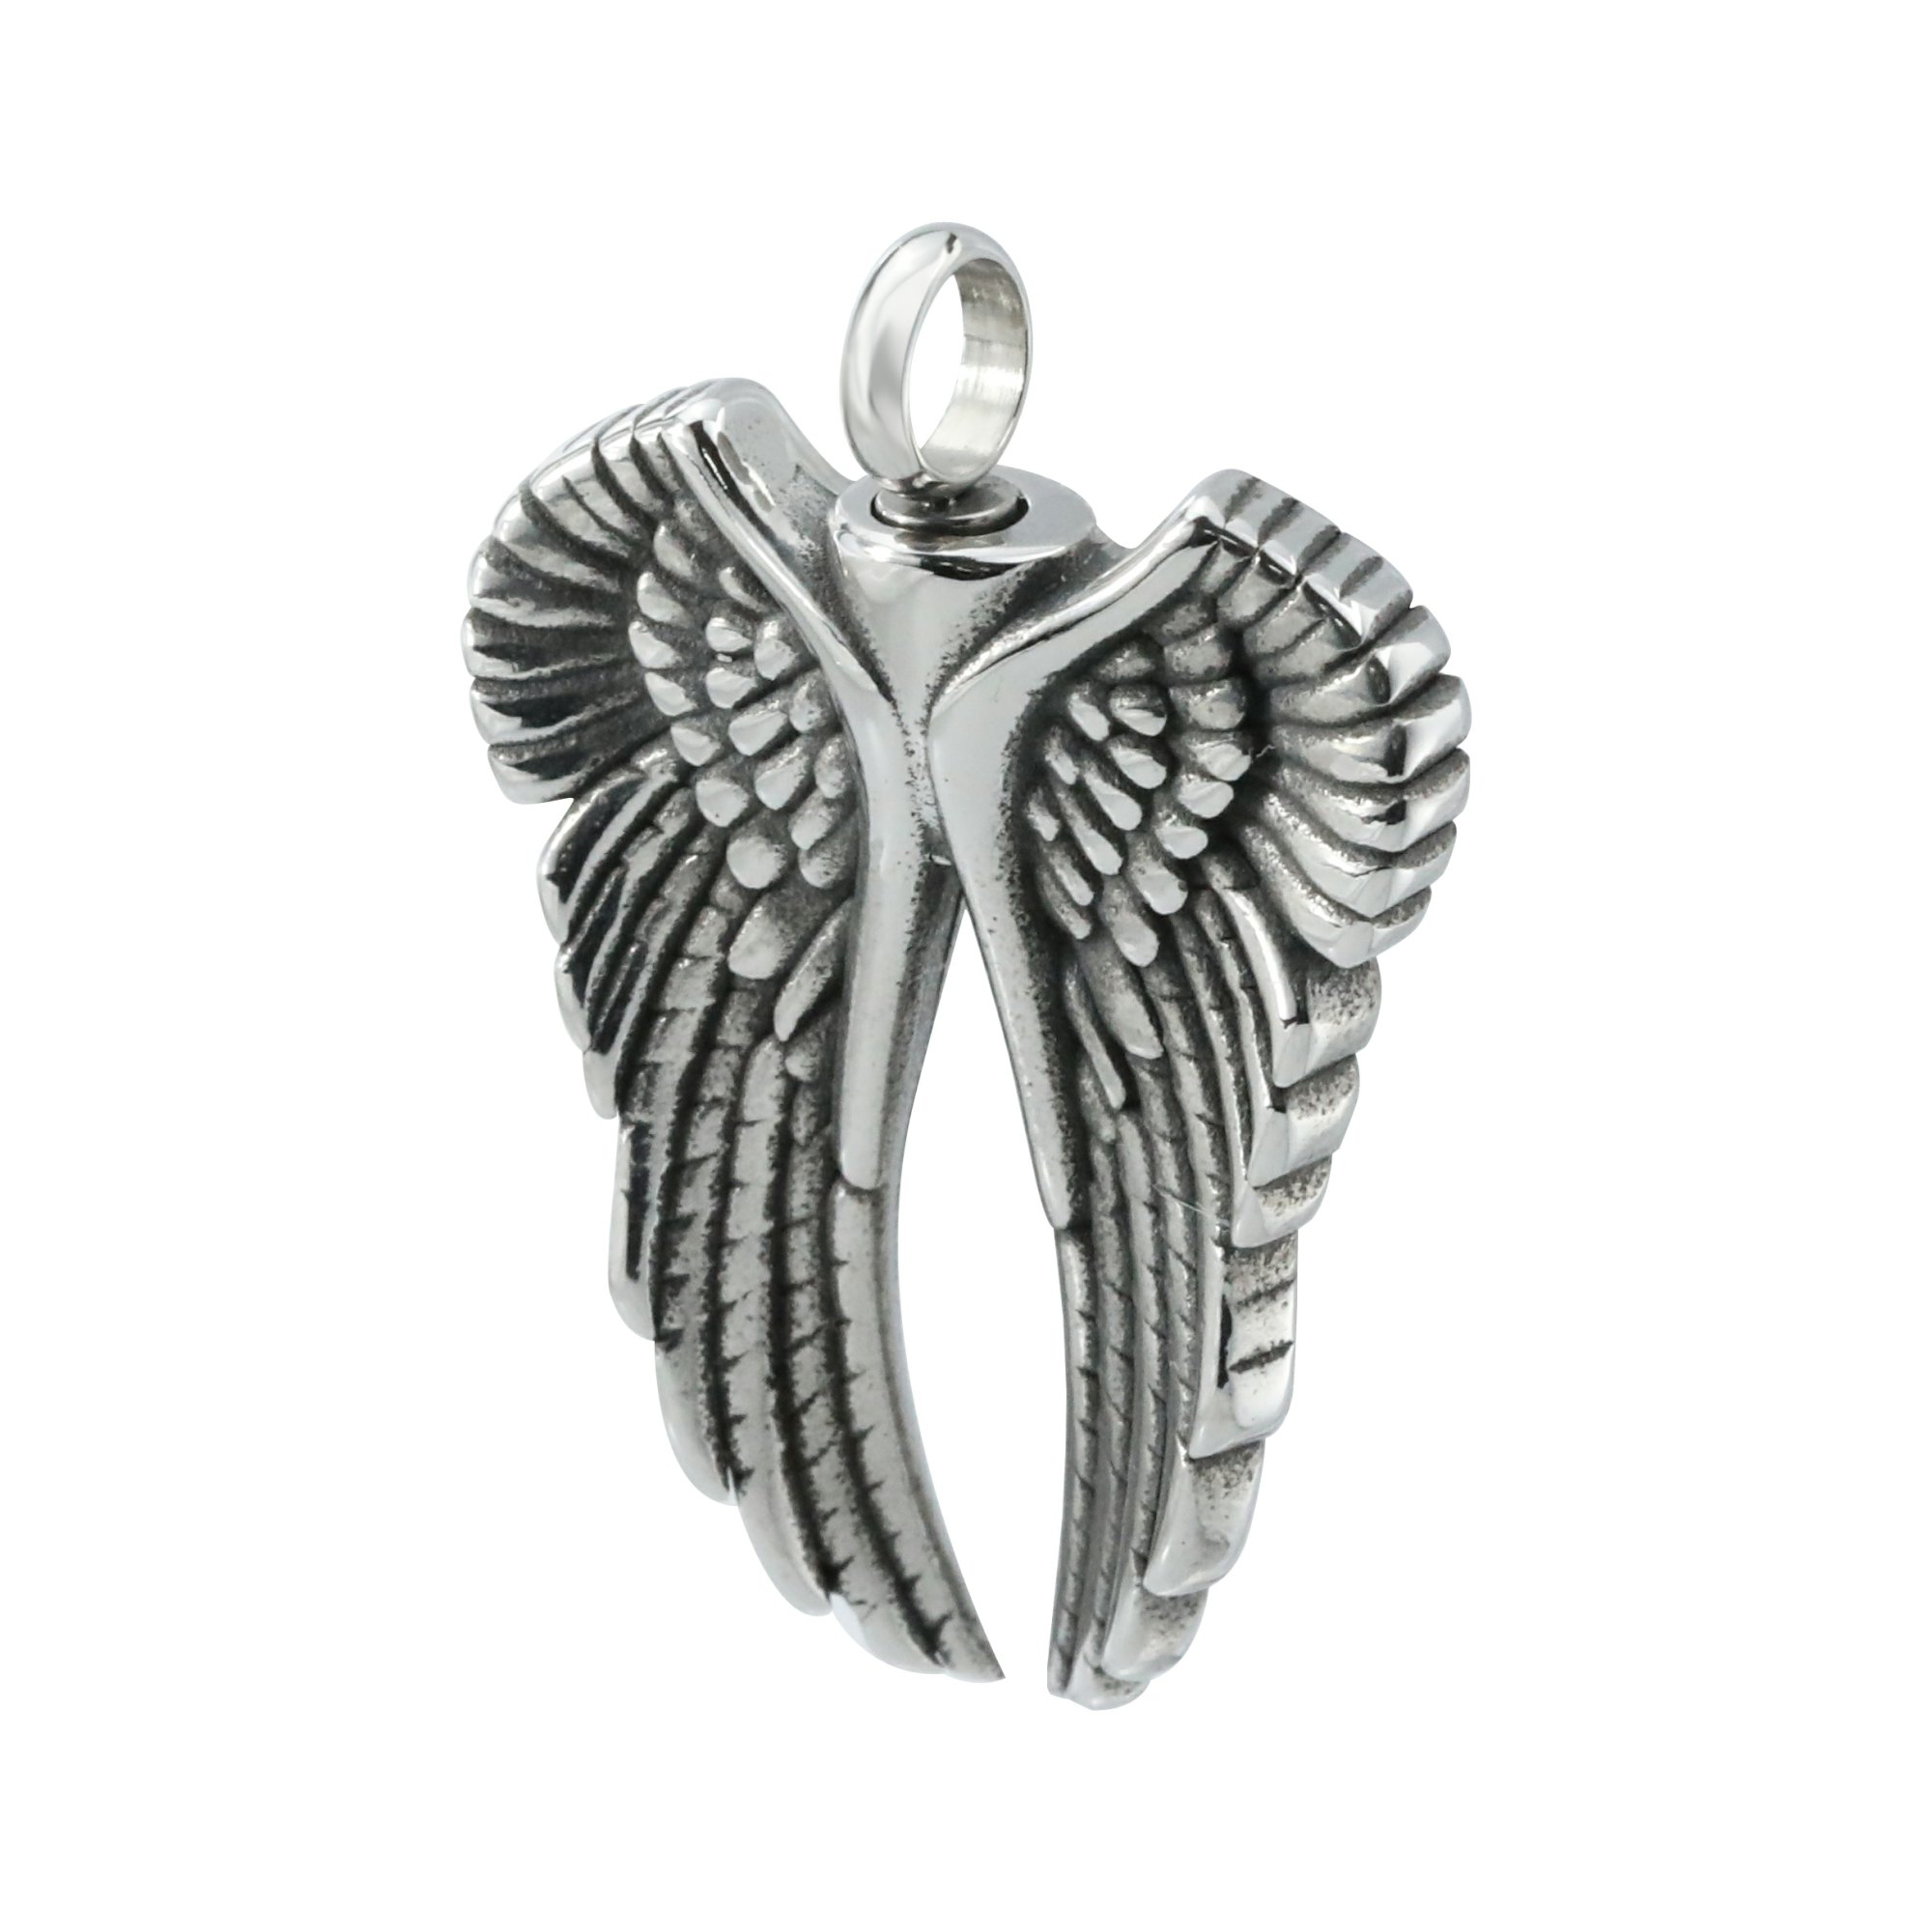 Keepsake Ash Canister Cremation Urn Set Antiqued Silver Angel Wings Stainless Steel Wish Vial Pendant Prayer Box 27x40MM 1190051 - Click Image to Close